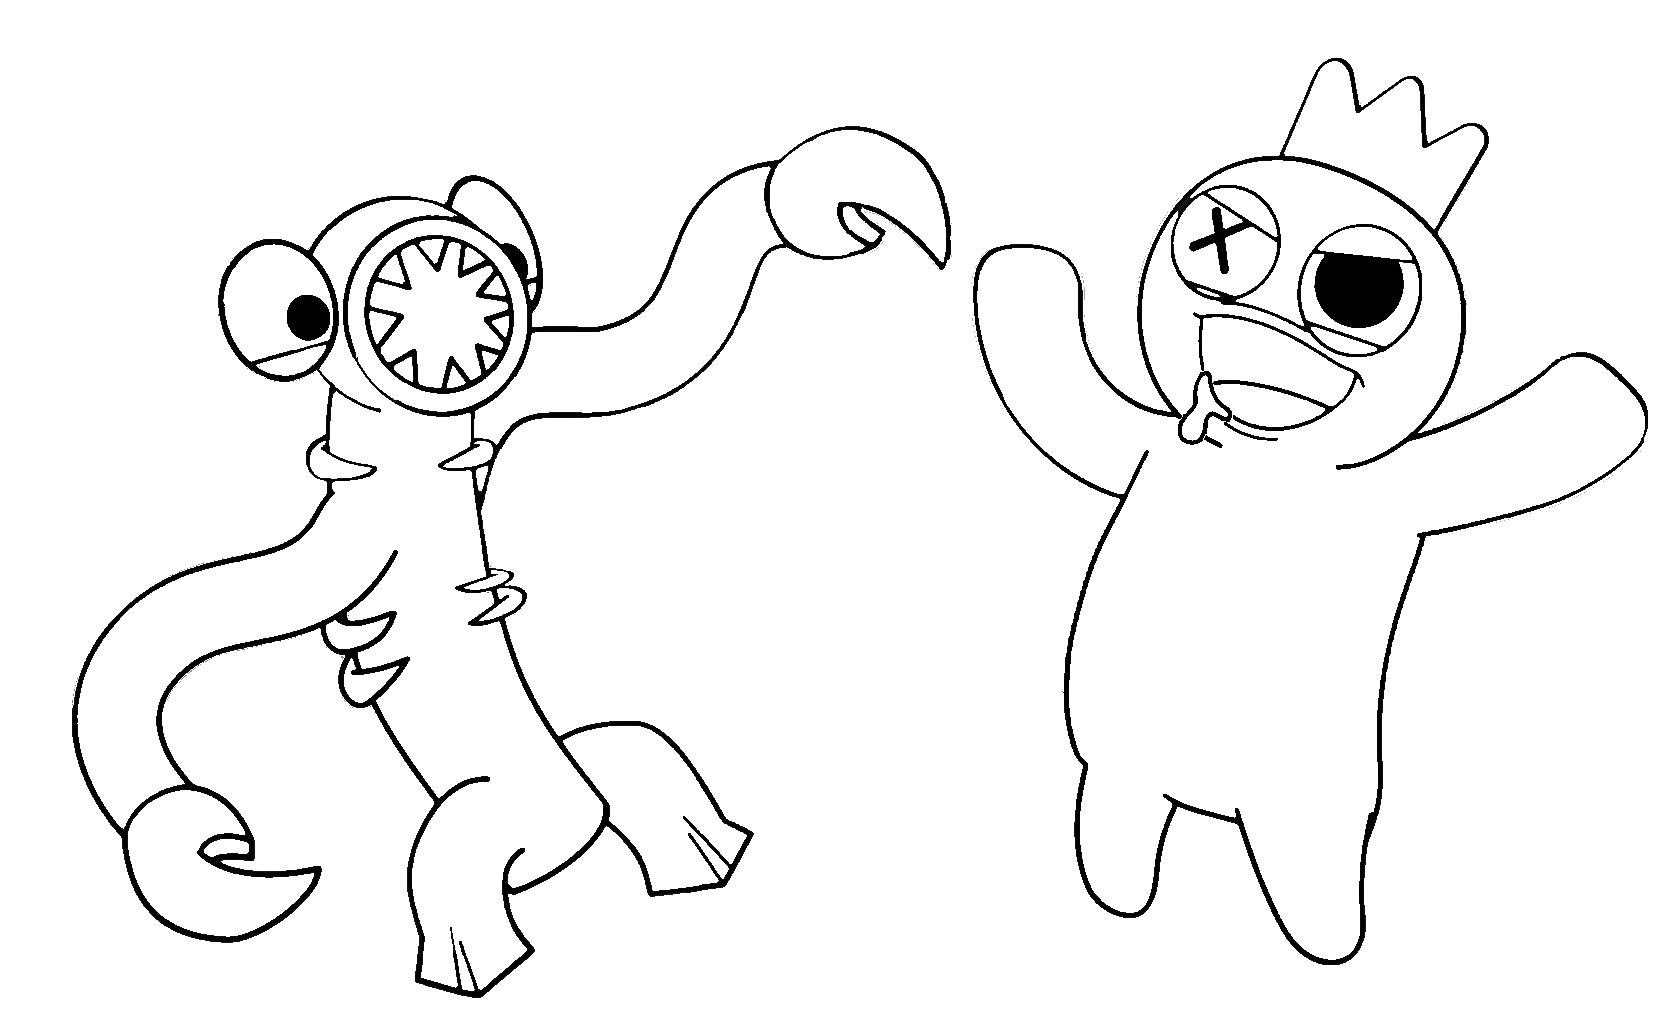 Doors coloring pages – Rainbow Friends 20 – Having fun with children